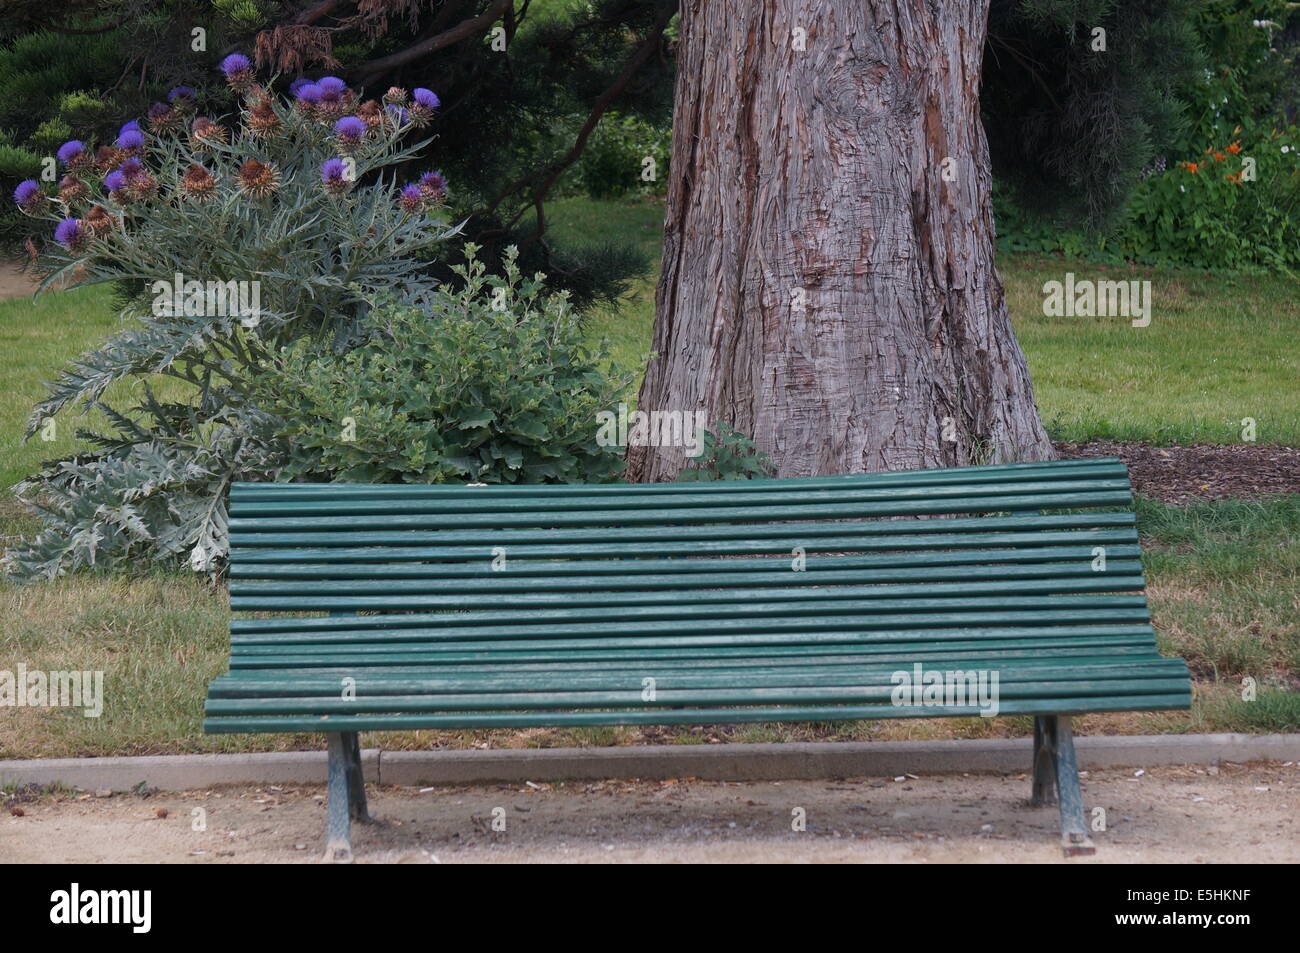 Empty green French bench with purple thistle flowers in the background in a Paris park Stock Photo